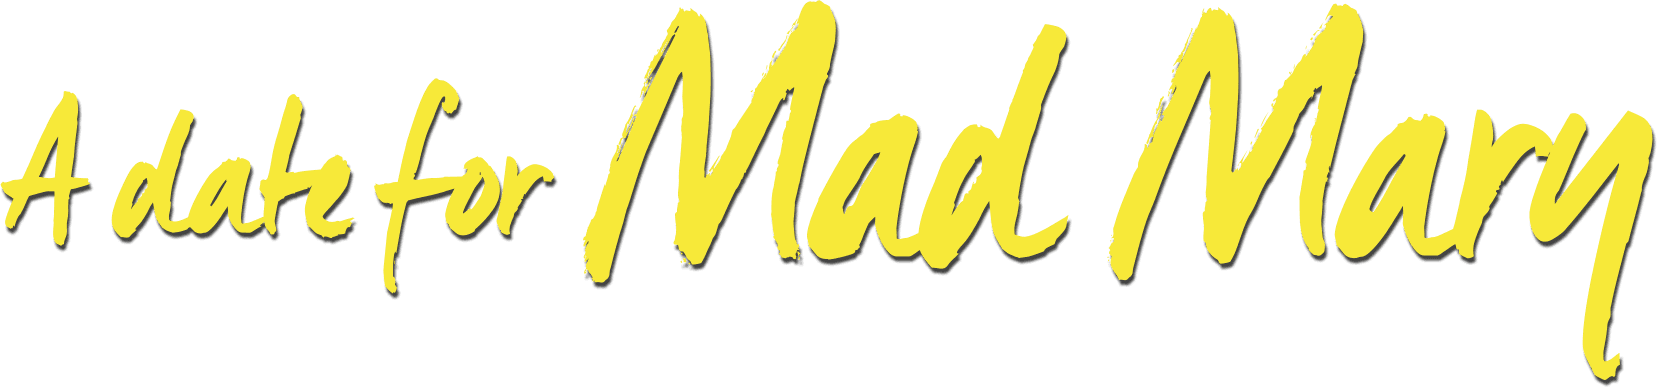 A Date for Mad Mary logo